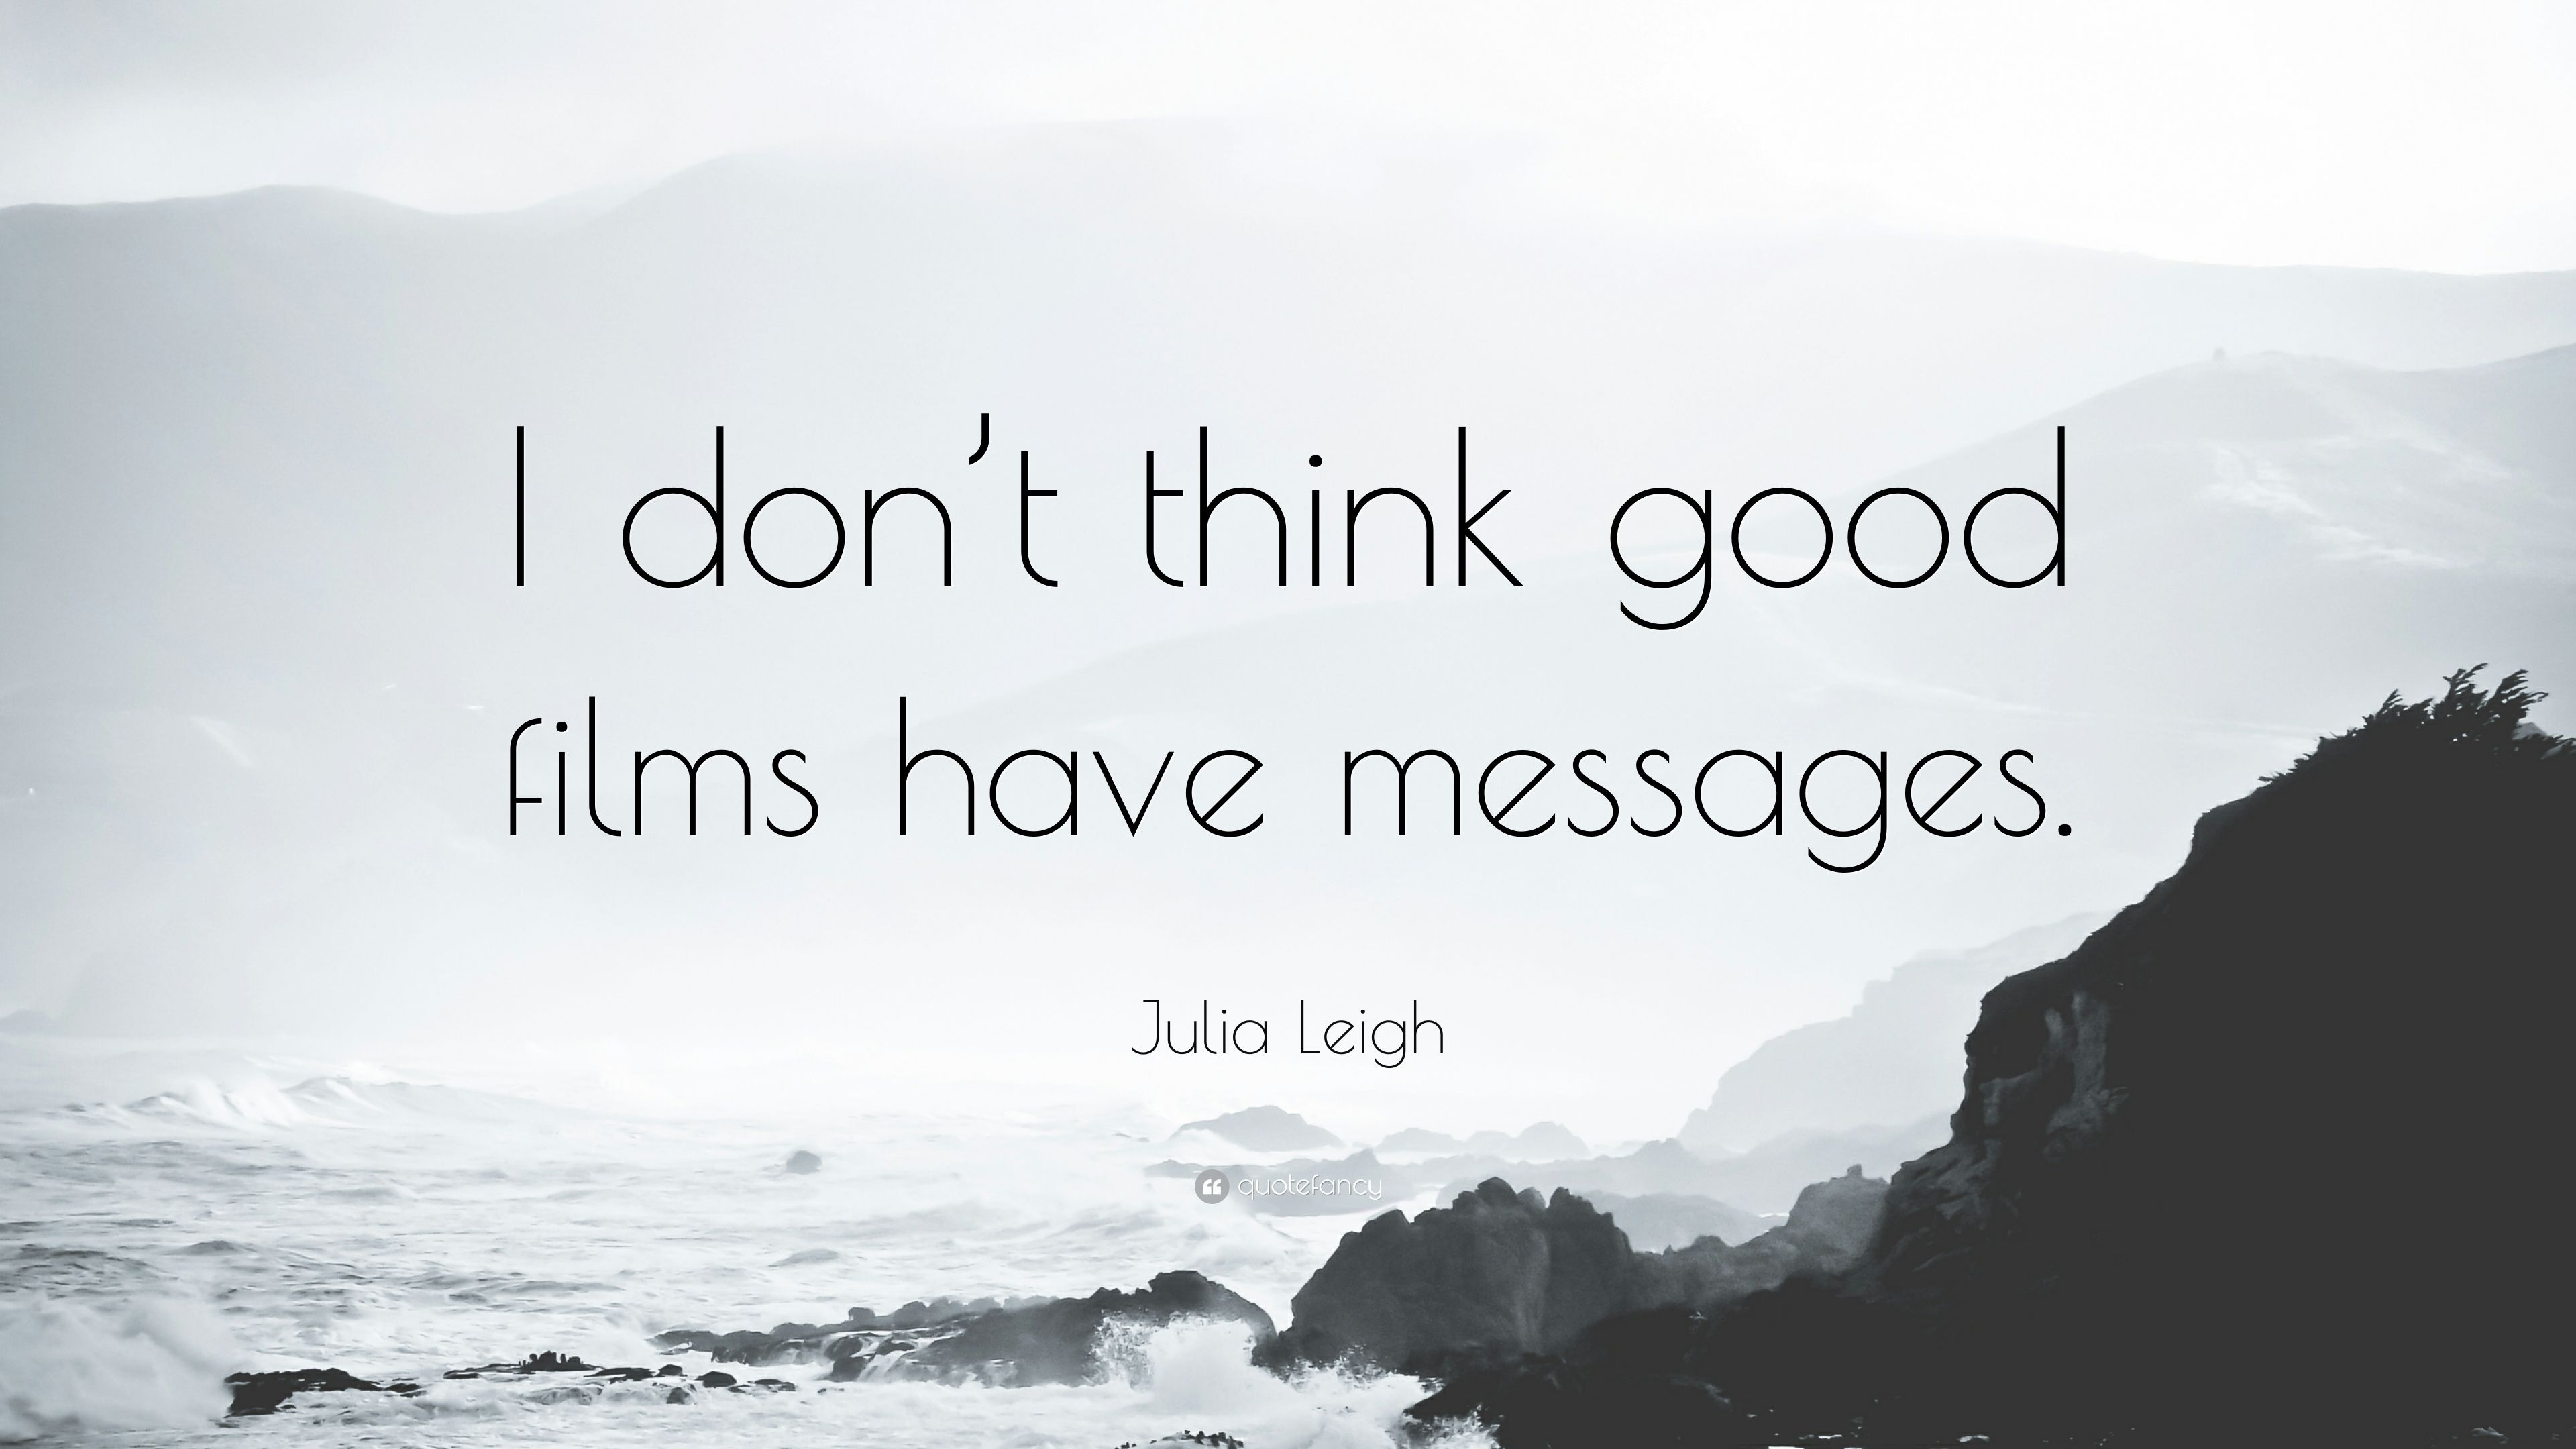 Julia Leigh Quote: “I don't think good films have messages.” 7